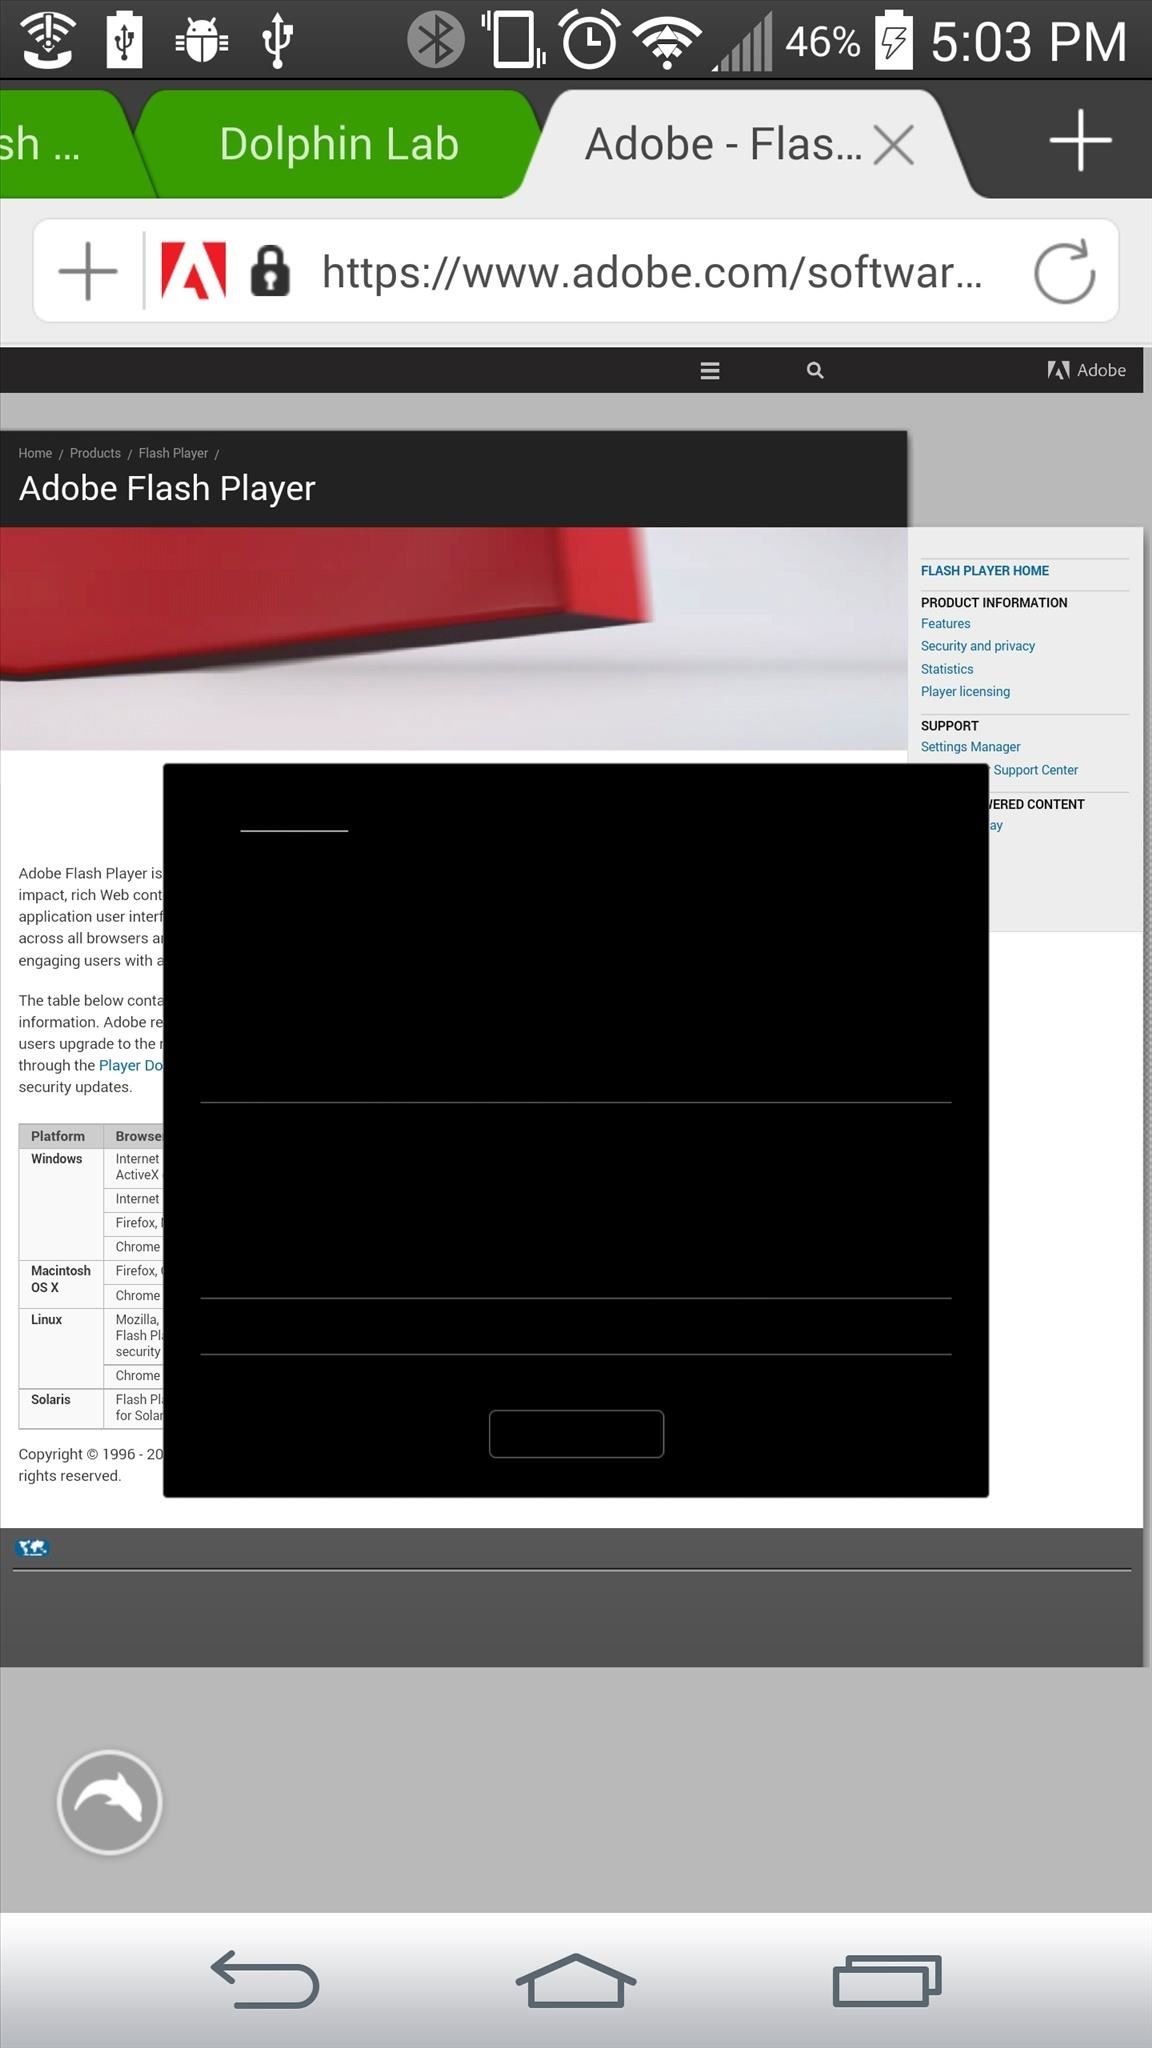 How to Install Adobe Flash Player on Your LG G3 to Play Web Games & Flash Videos